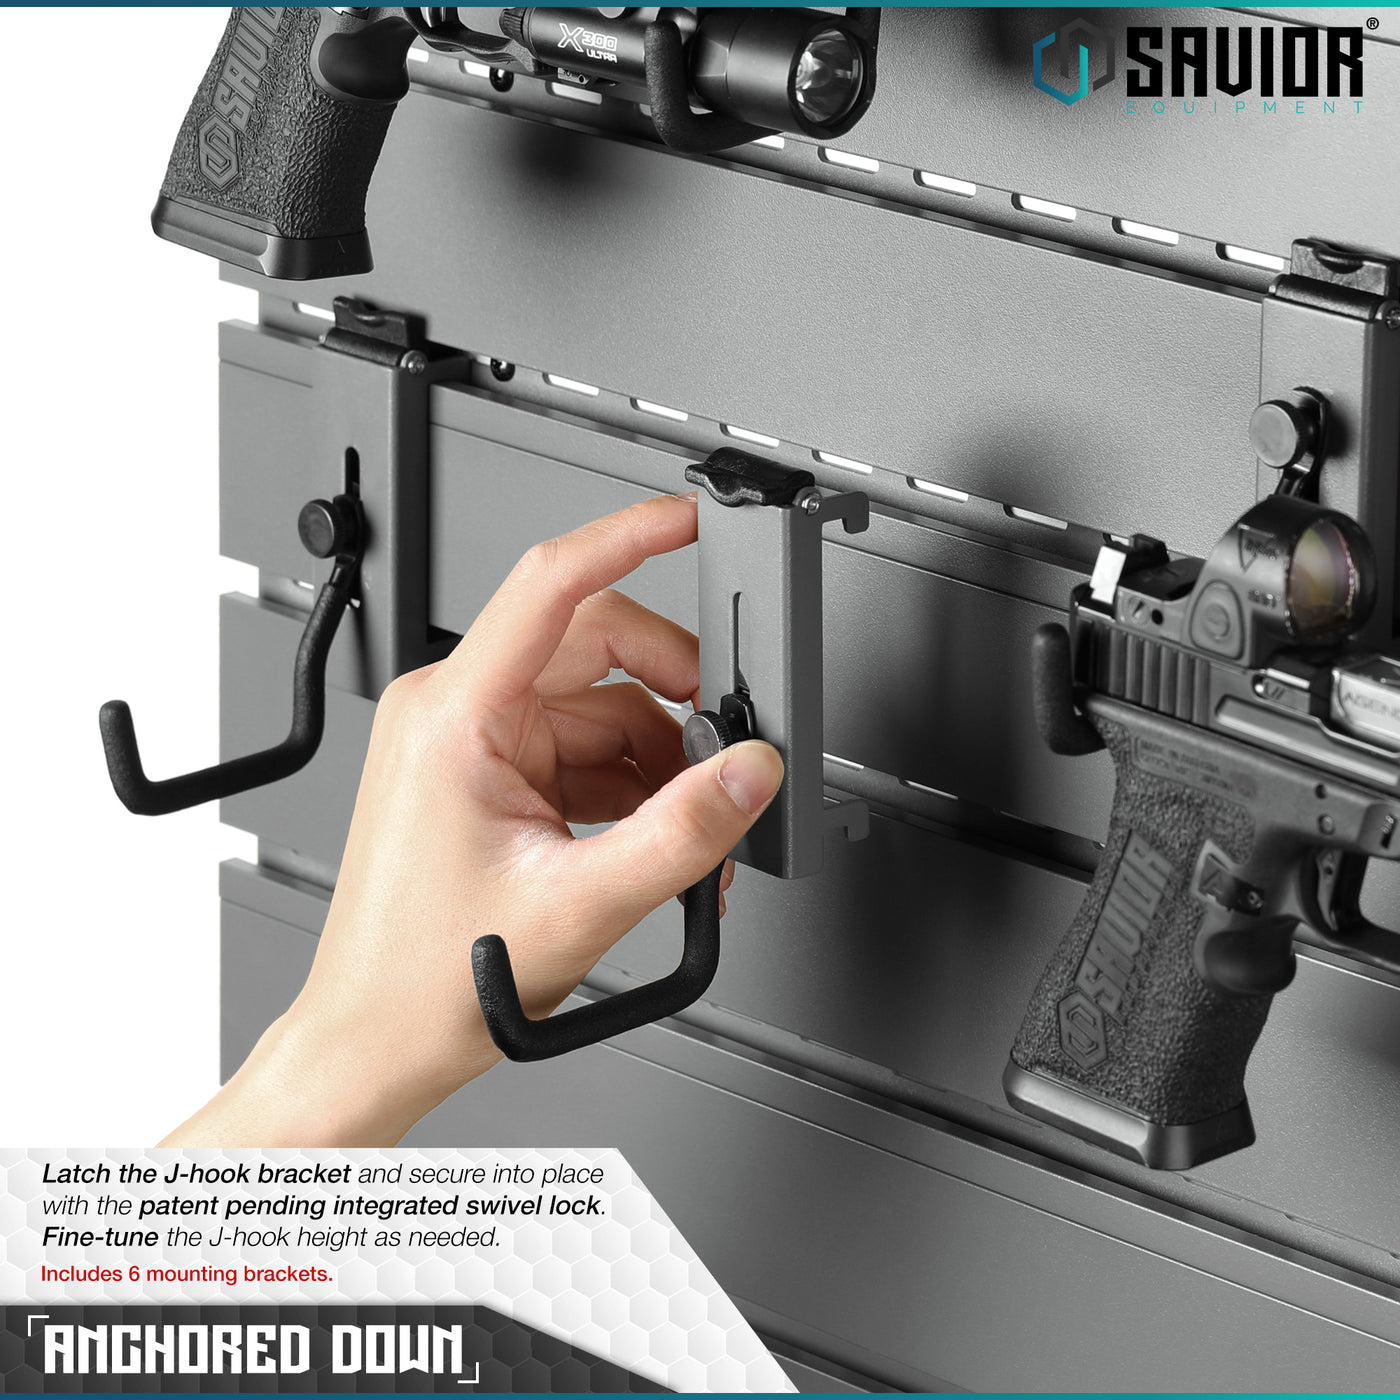 Anchored Down - Latch the patent pending J-hook bracket and secure into place with the integrated swivel lock. Fine-tune the J-hook height as needed. Includes 6 mounting brackets.